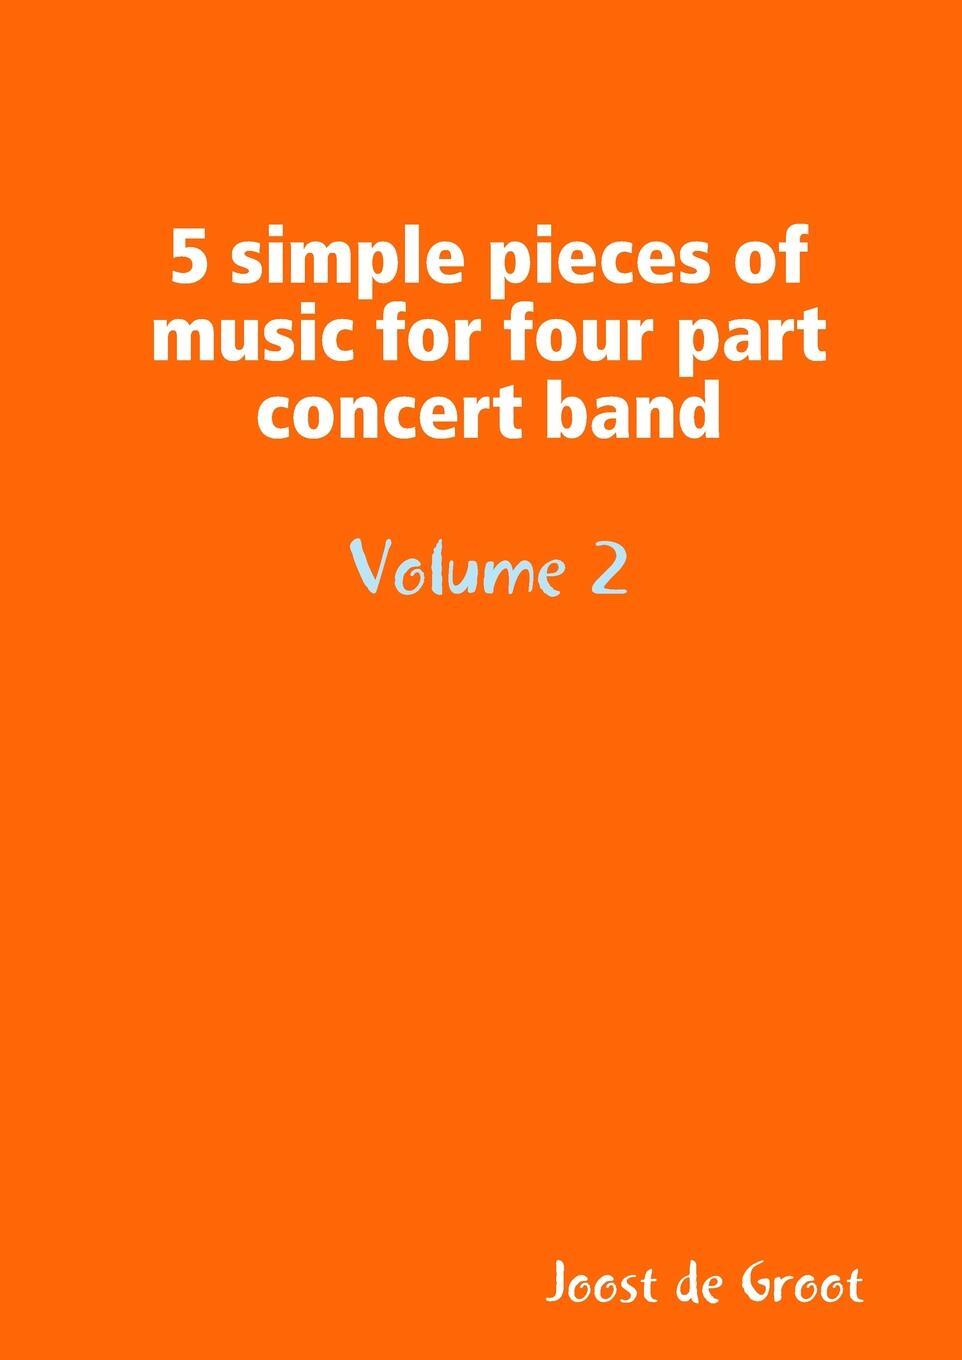 фото 5 simple pieces of music for four part concert band Volume 2